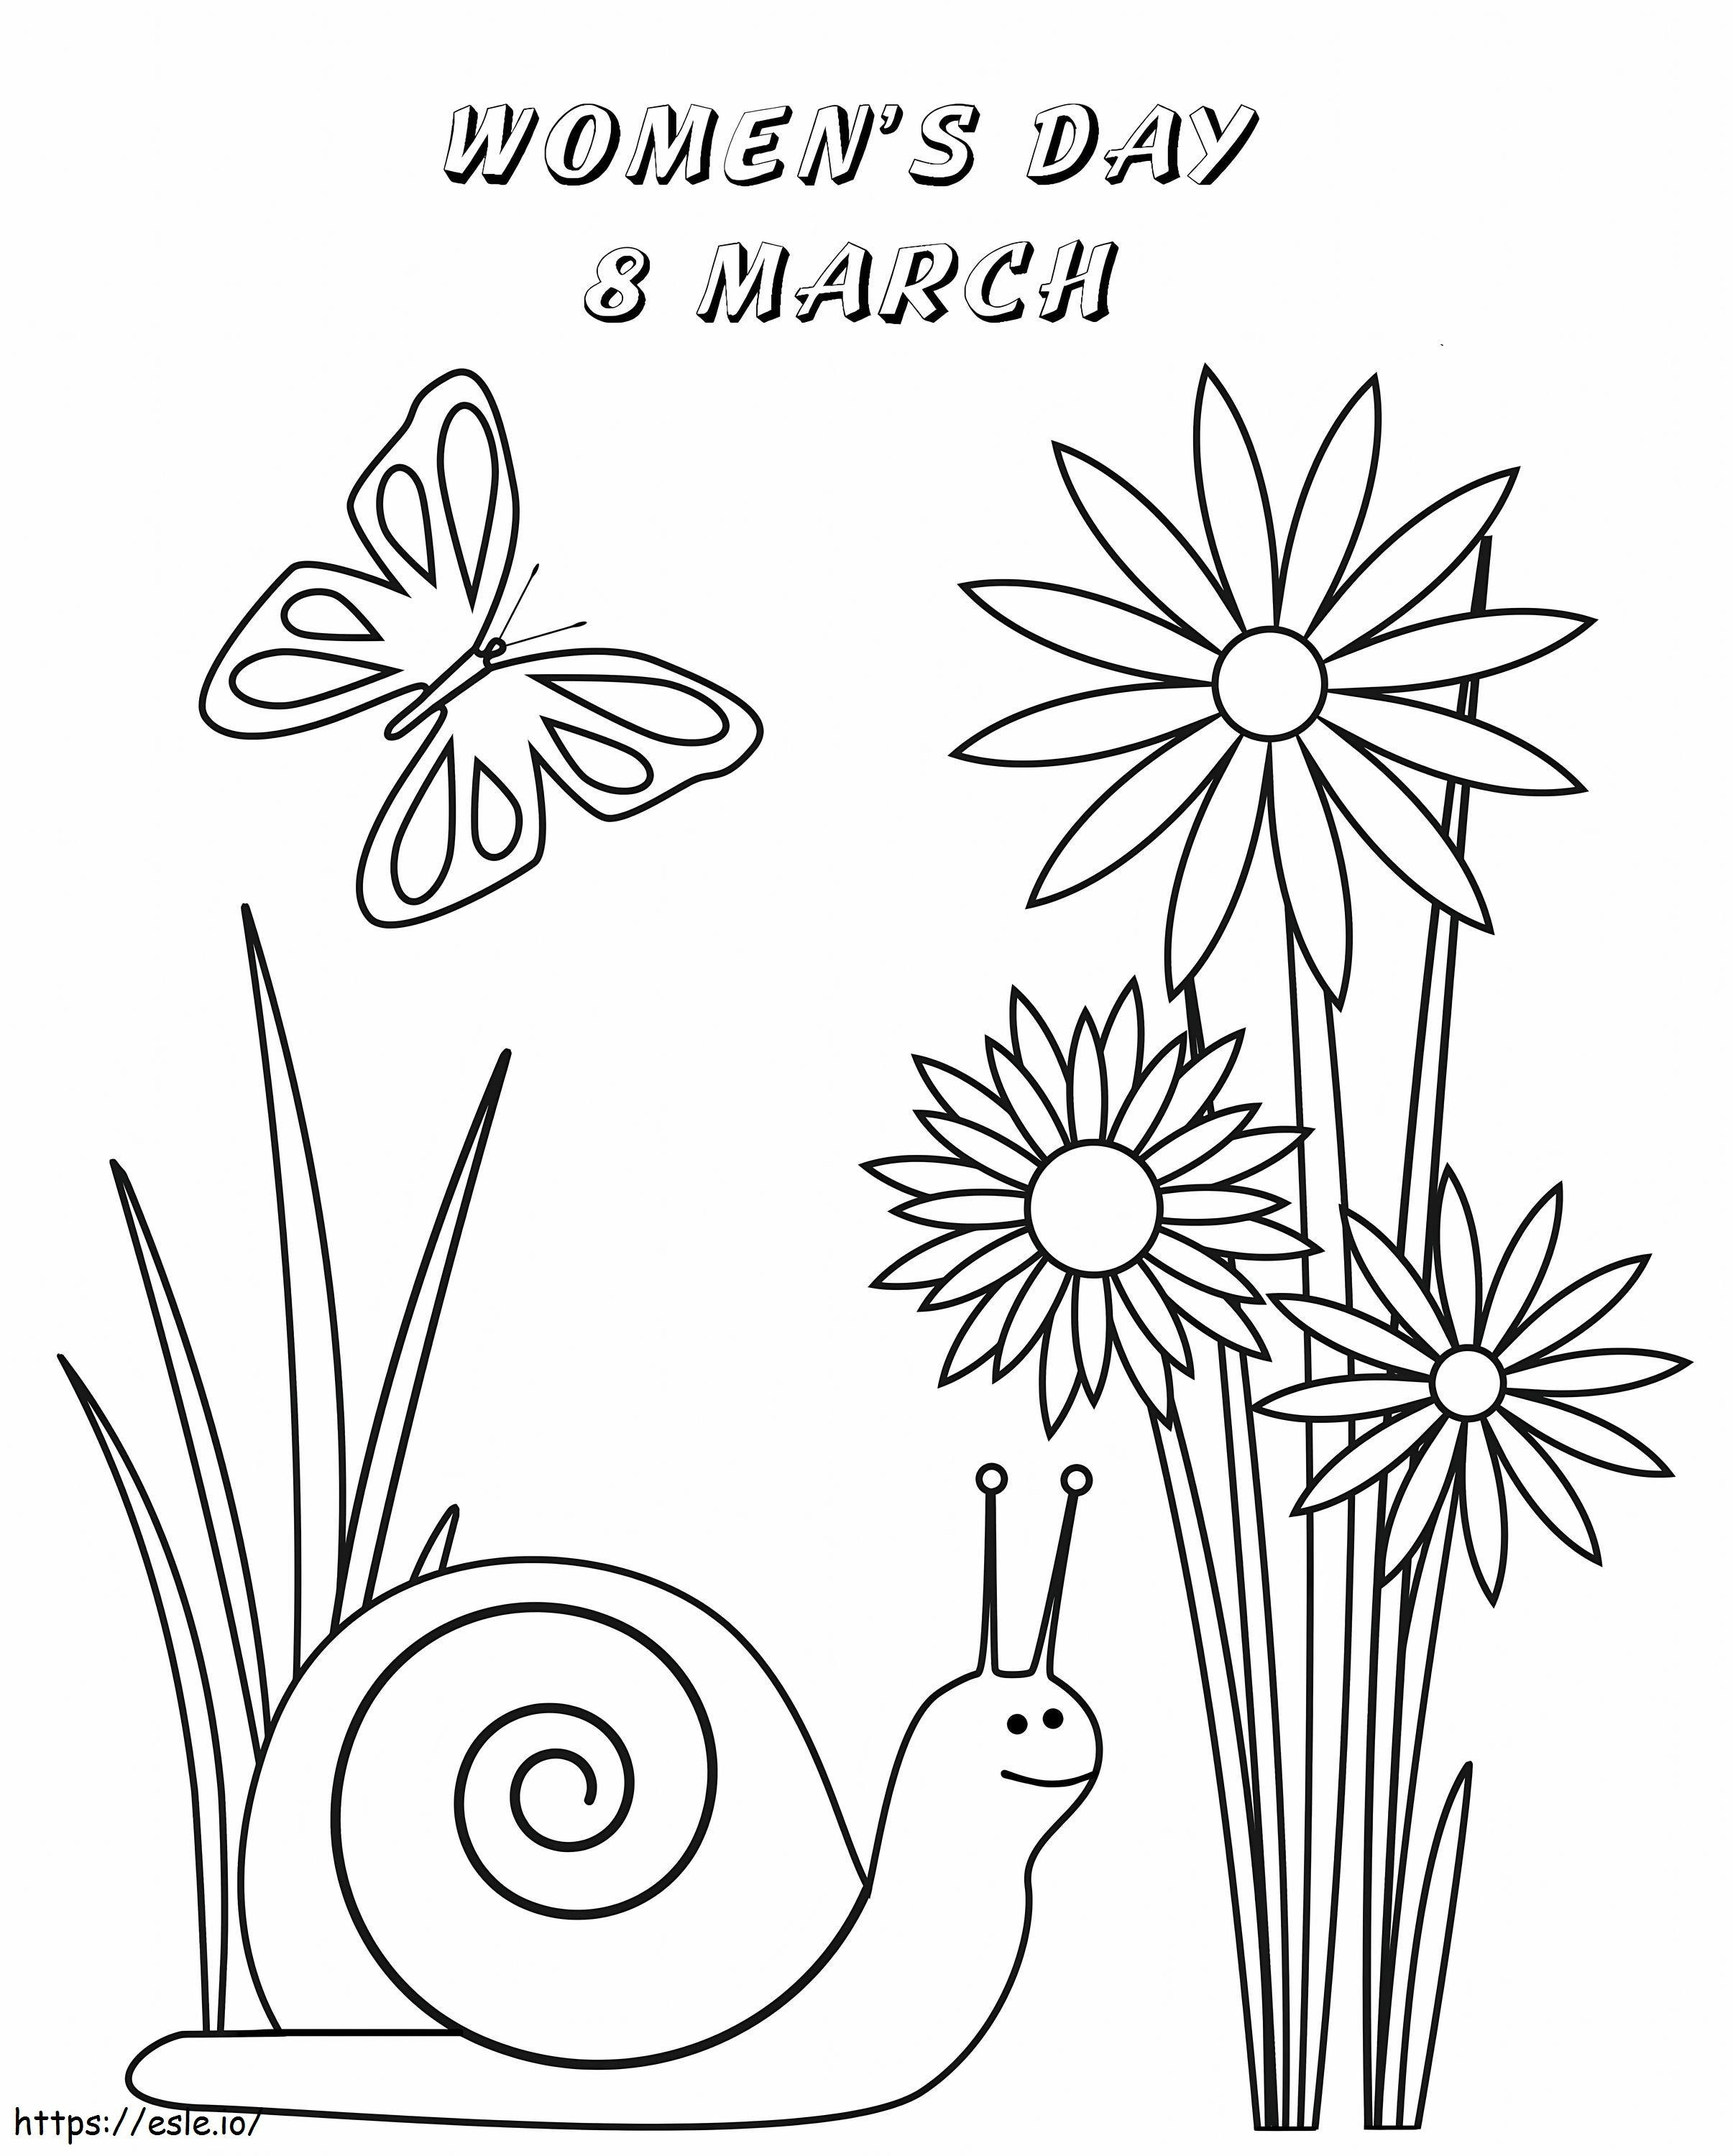 Happy Women'S Day And Snail coloring page